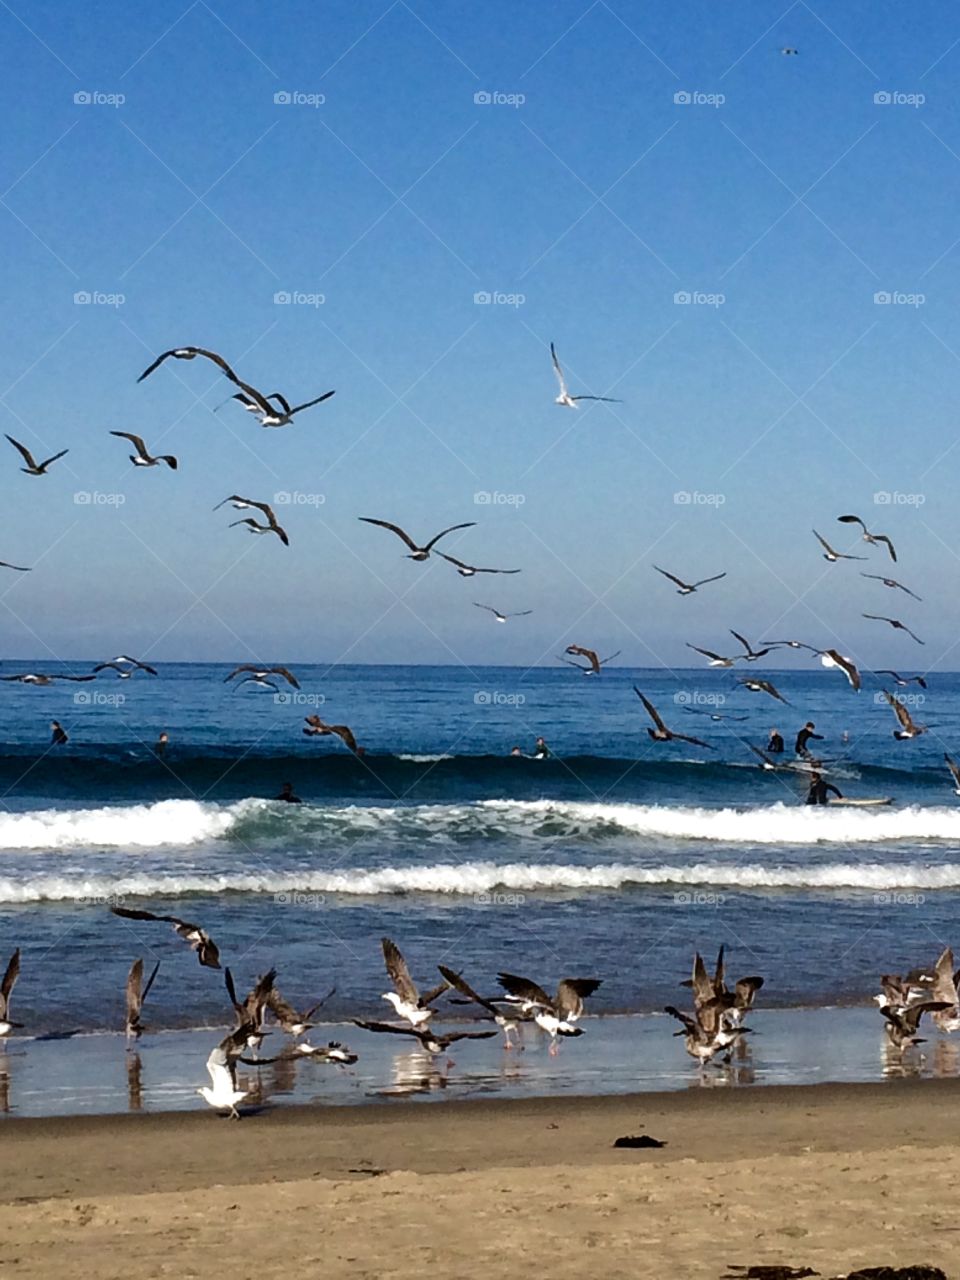 Birds and Surfers take over the beach. Birds and surfers take over the beach